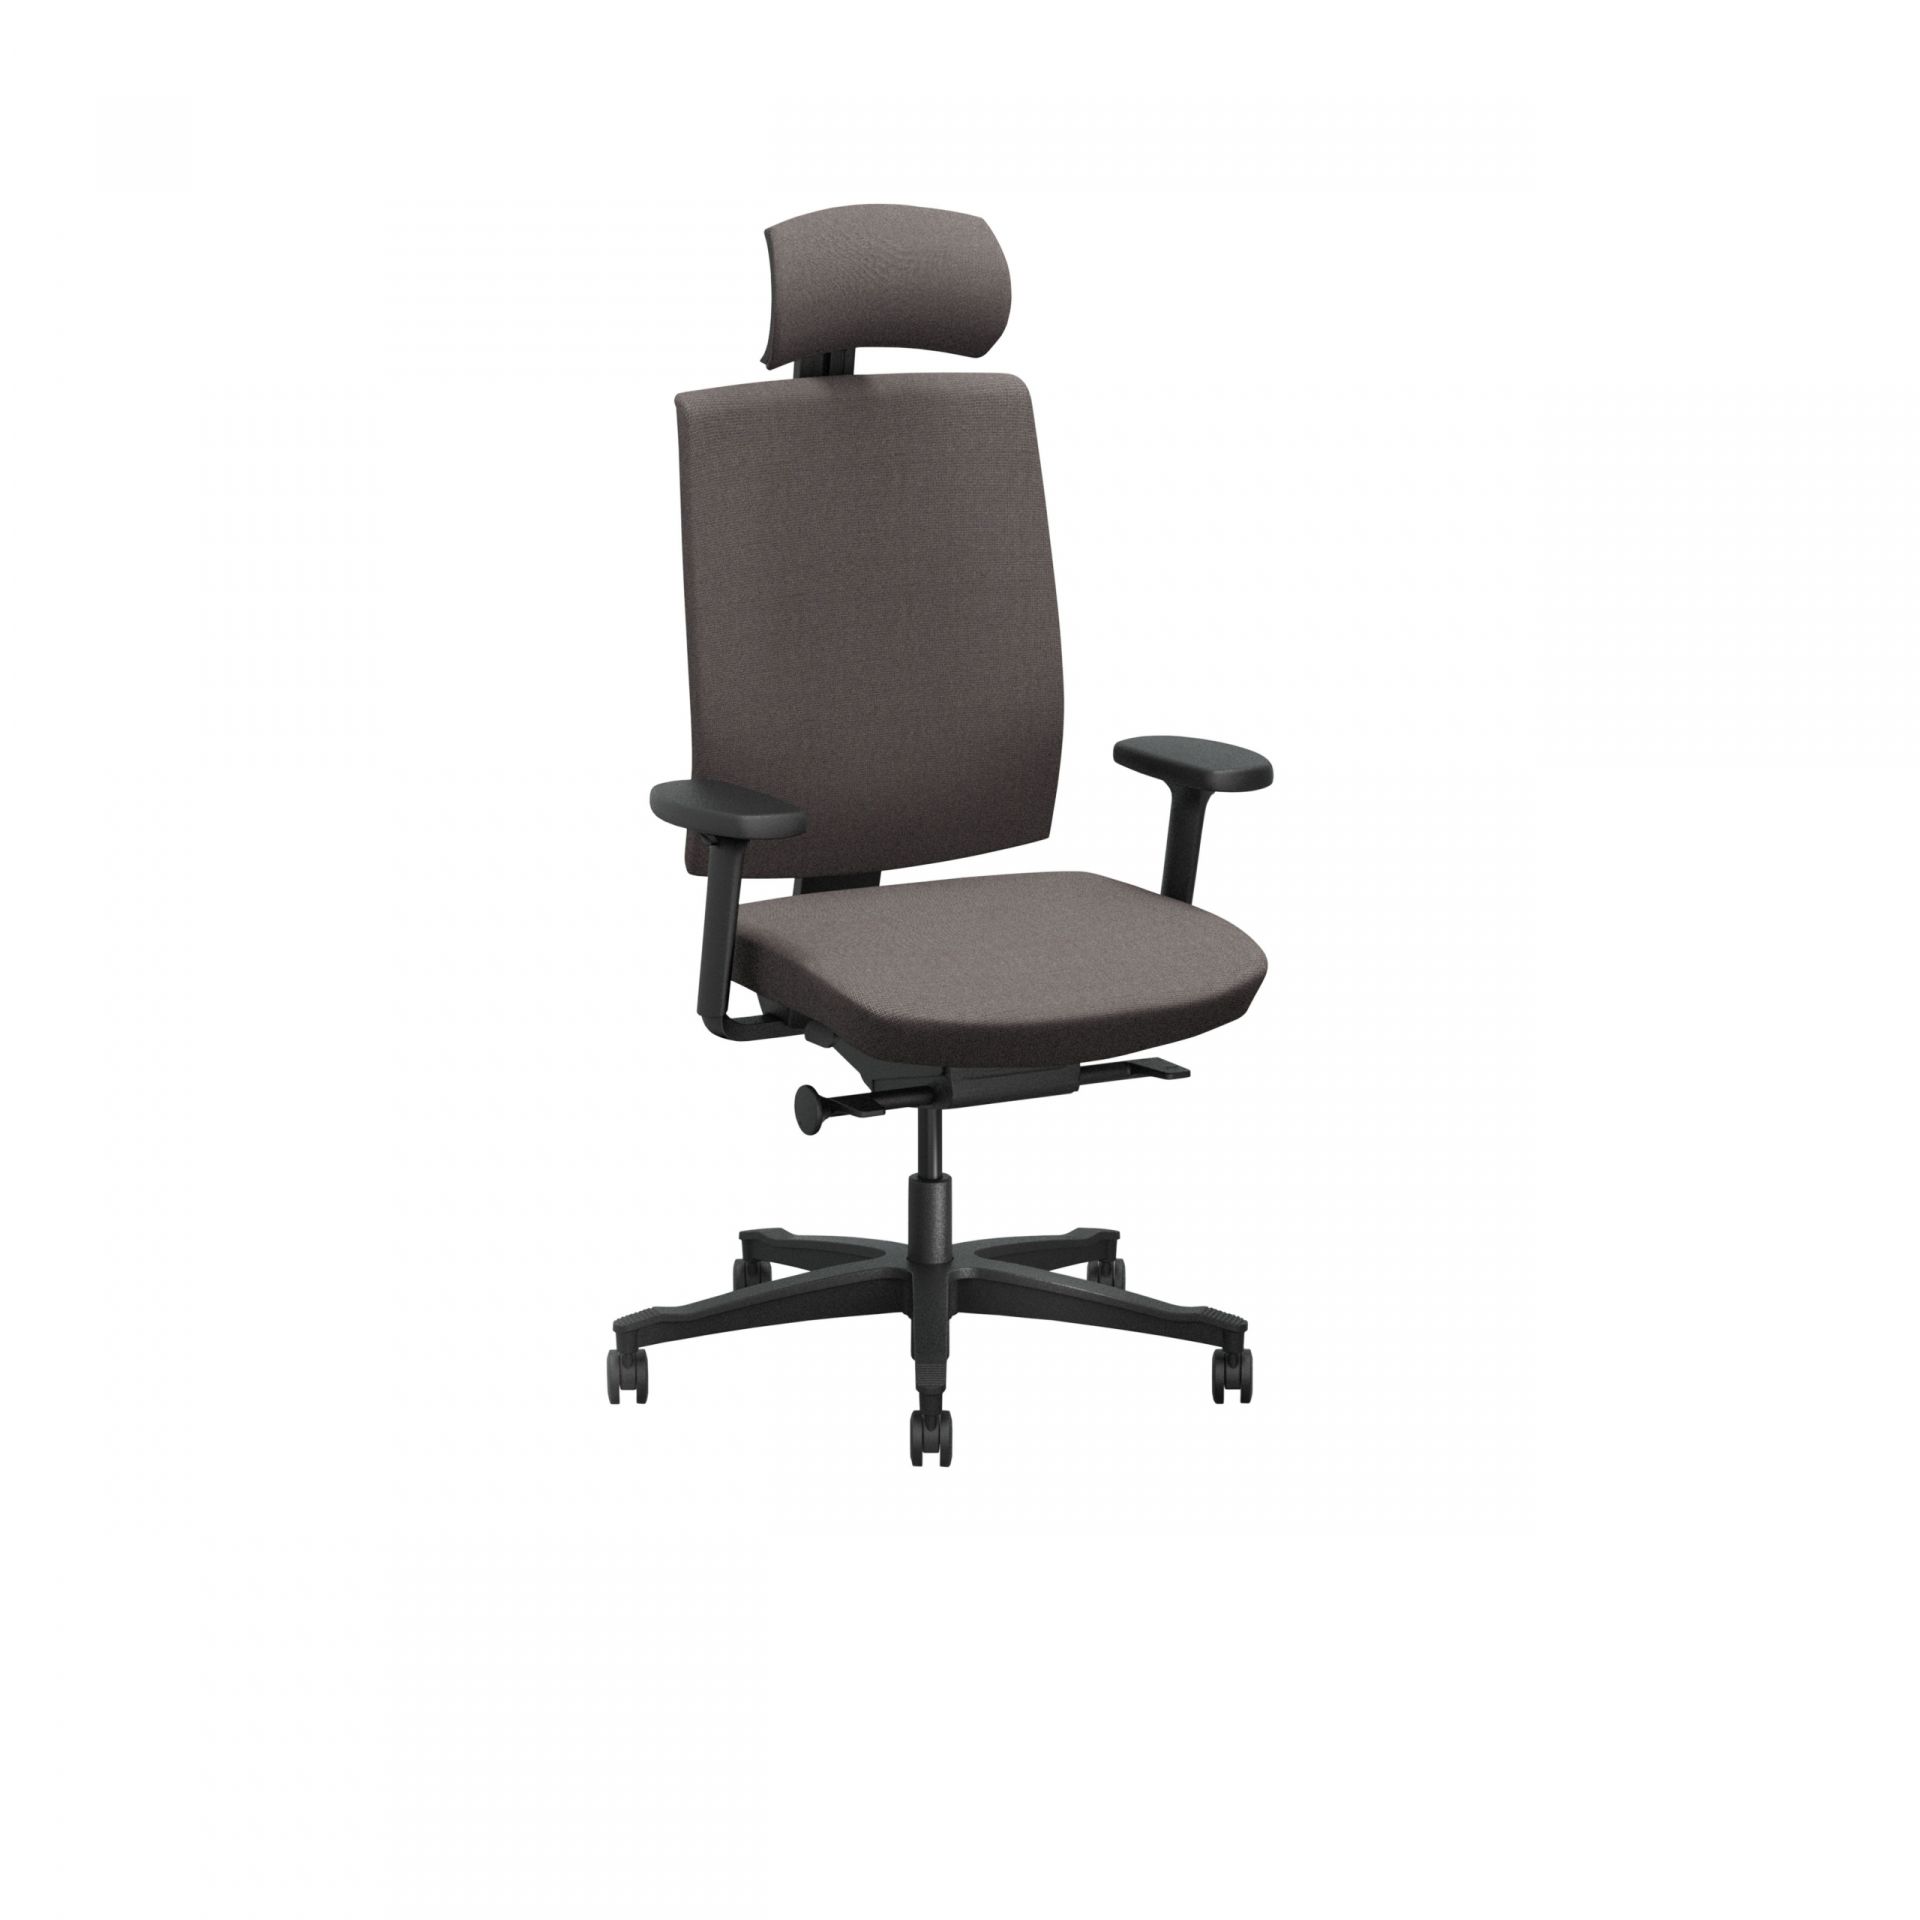 One Office chair with upholstered back